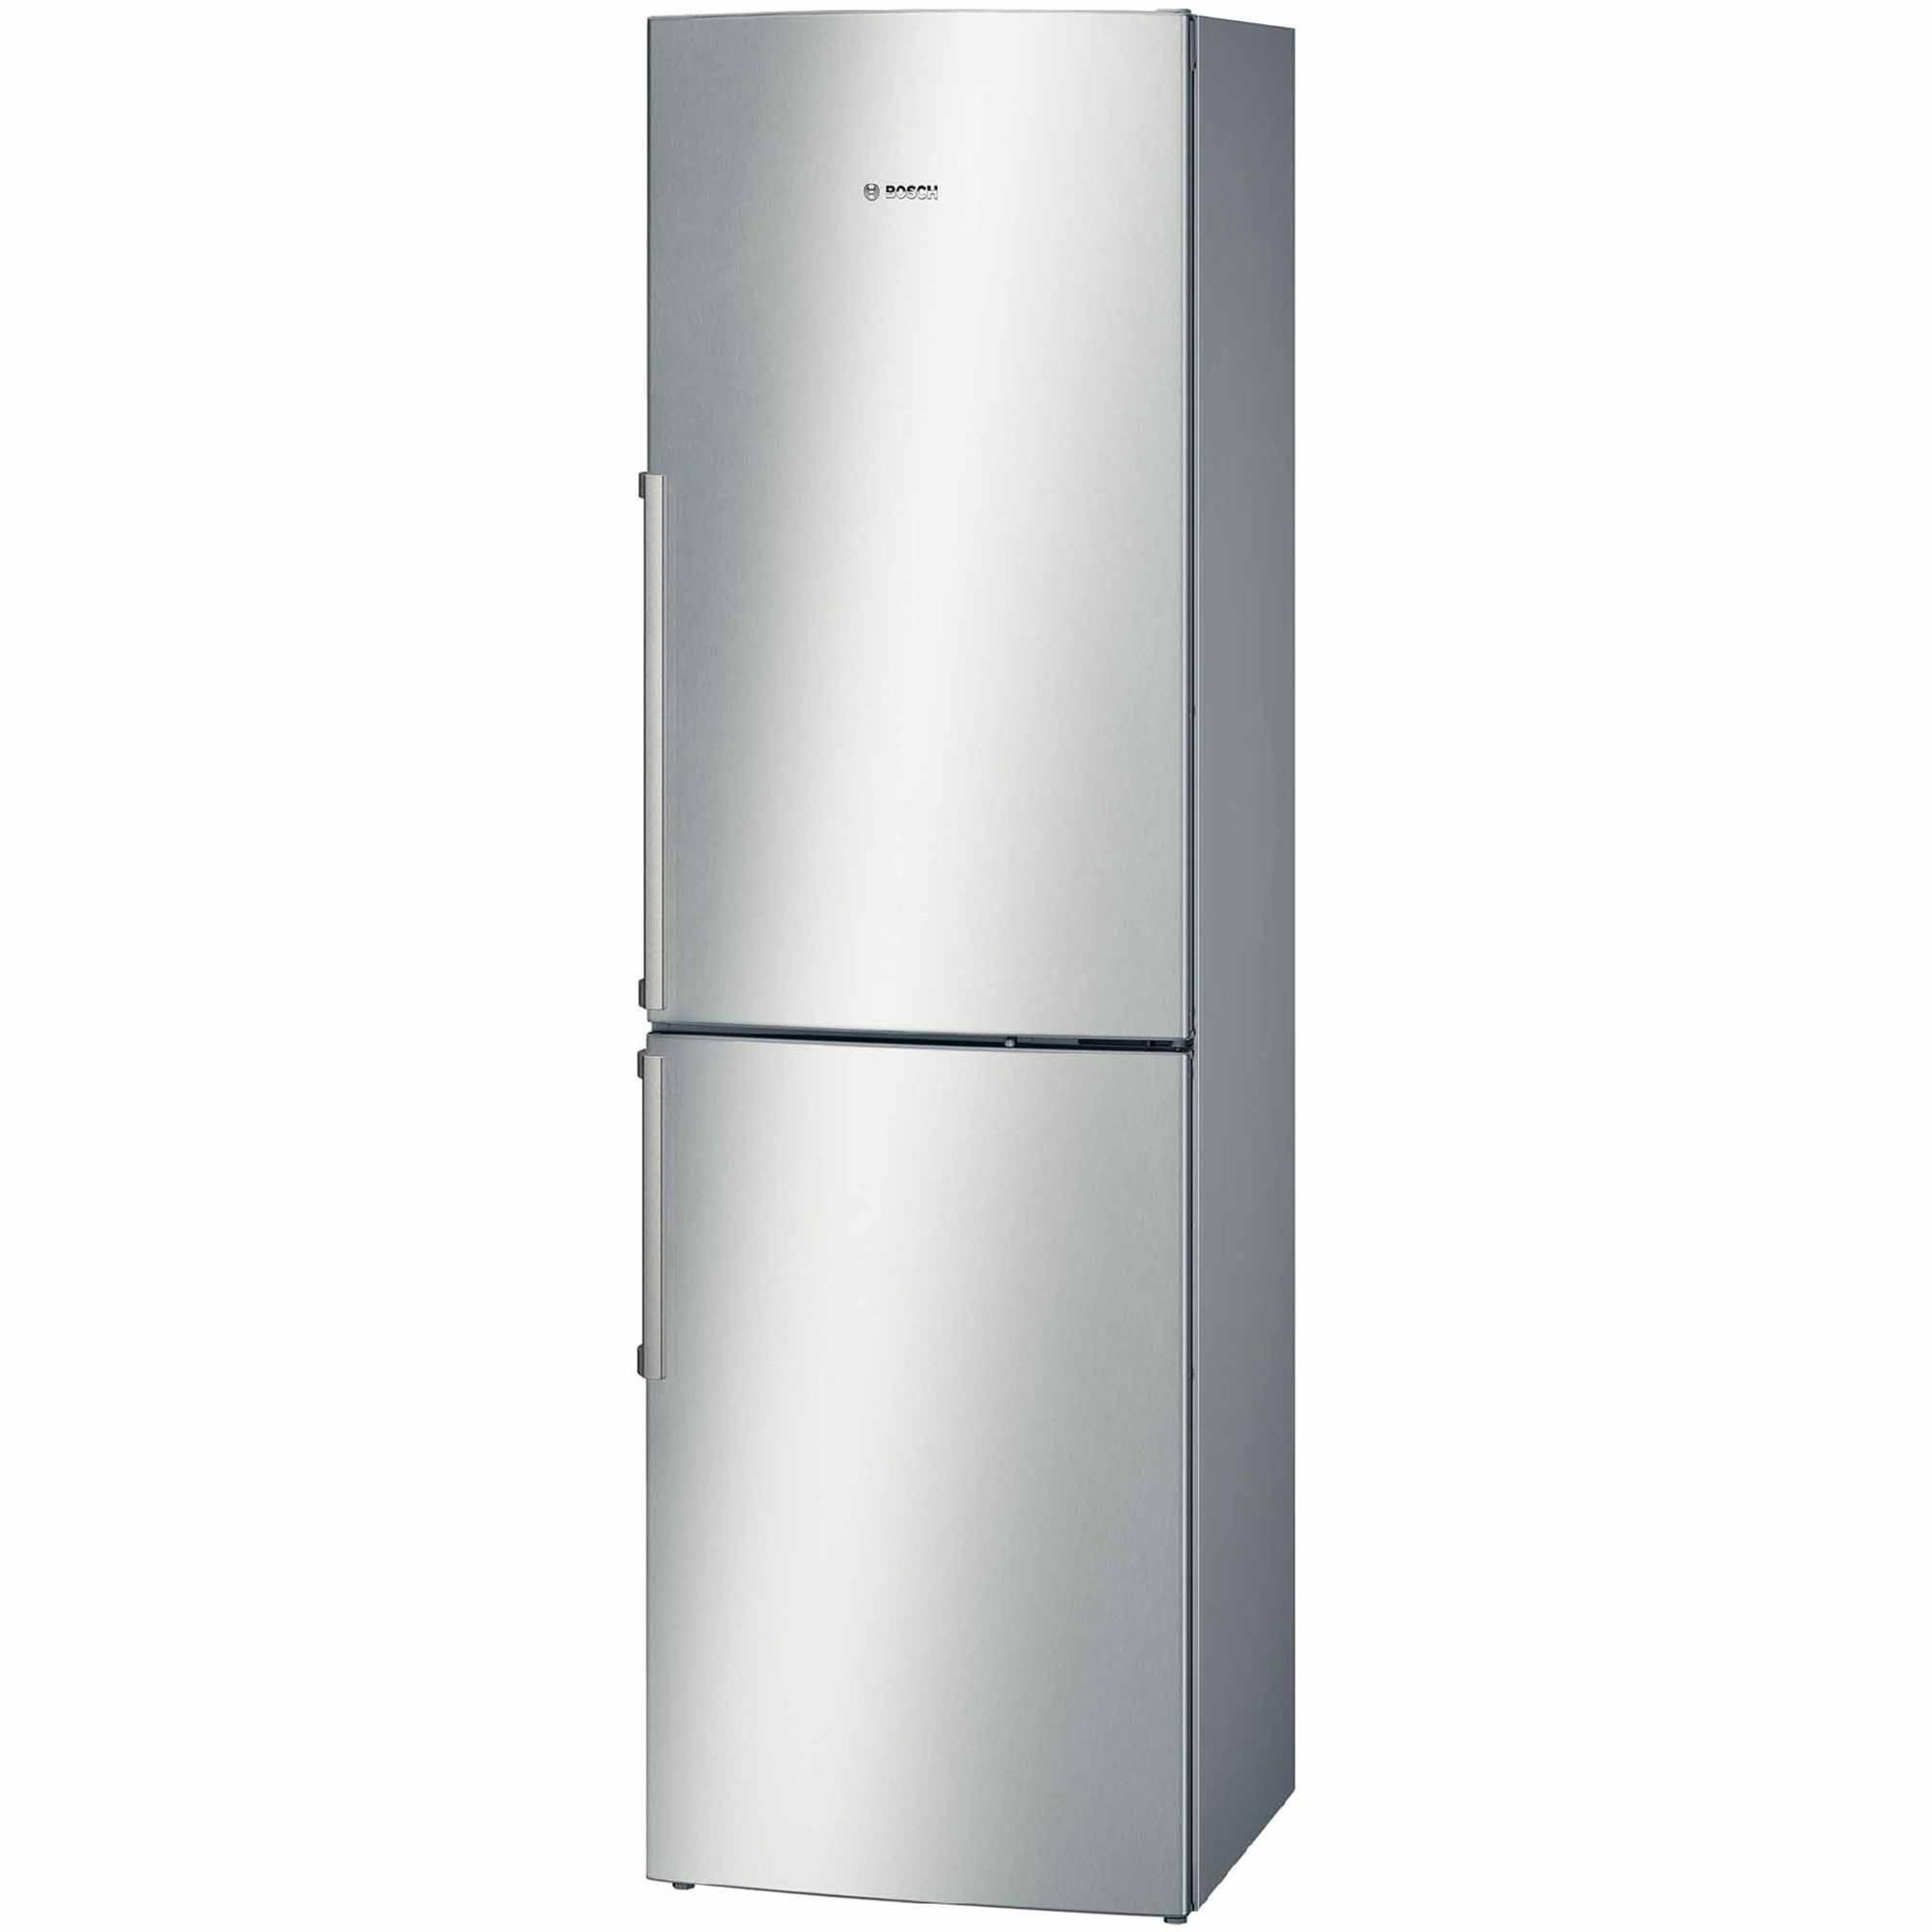 What are some highly rated counter-flush refrigerators?